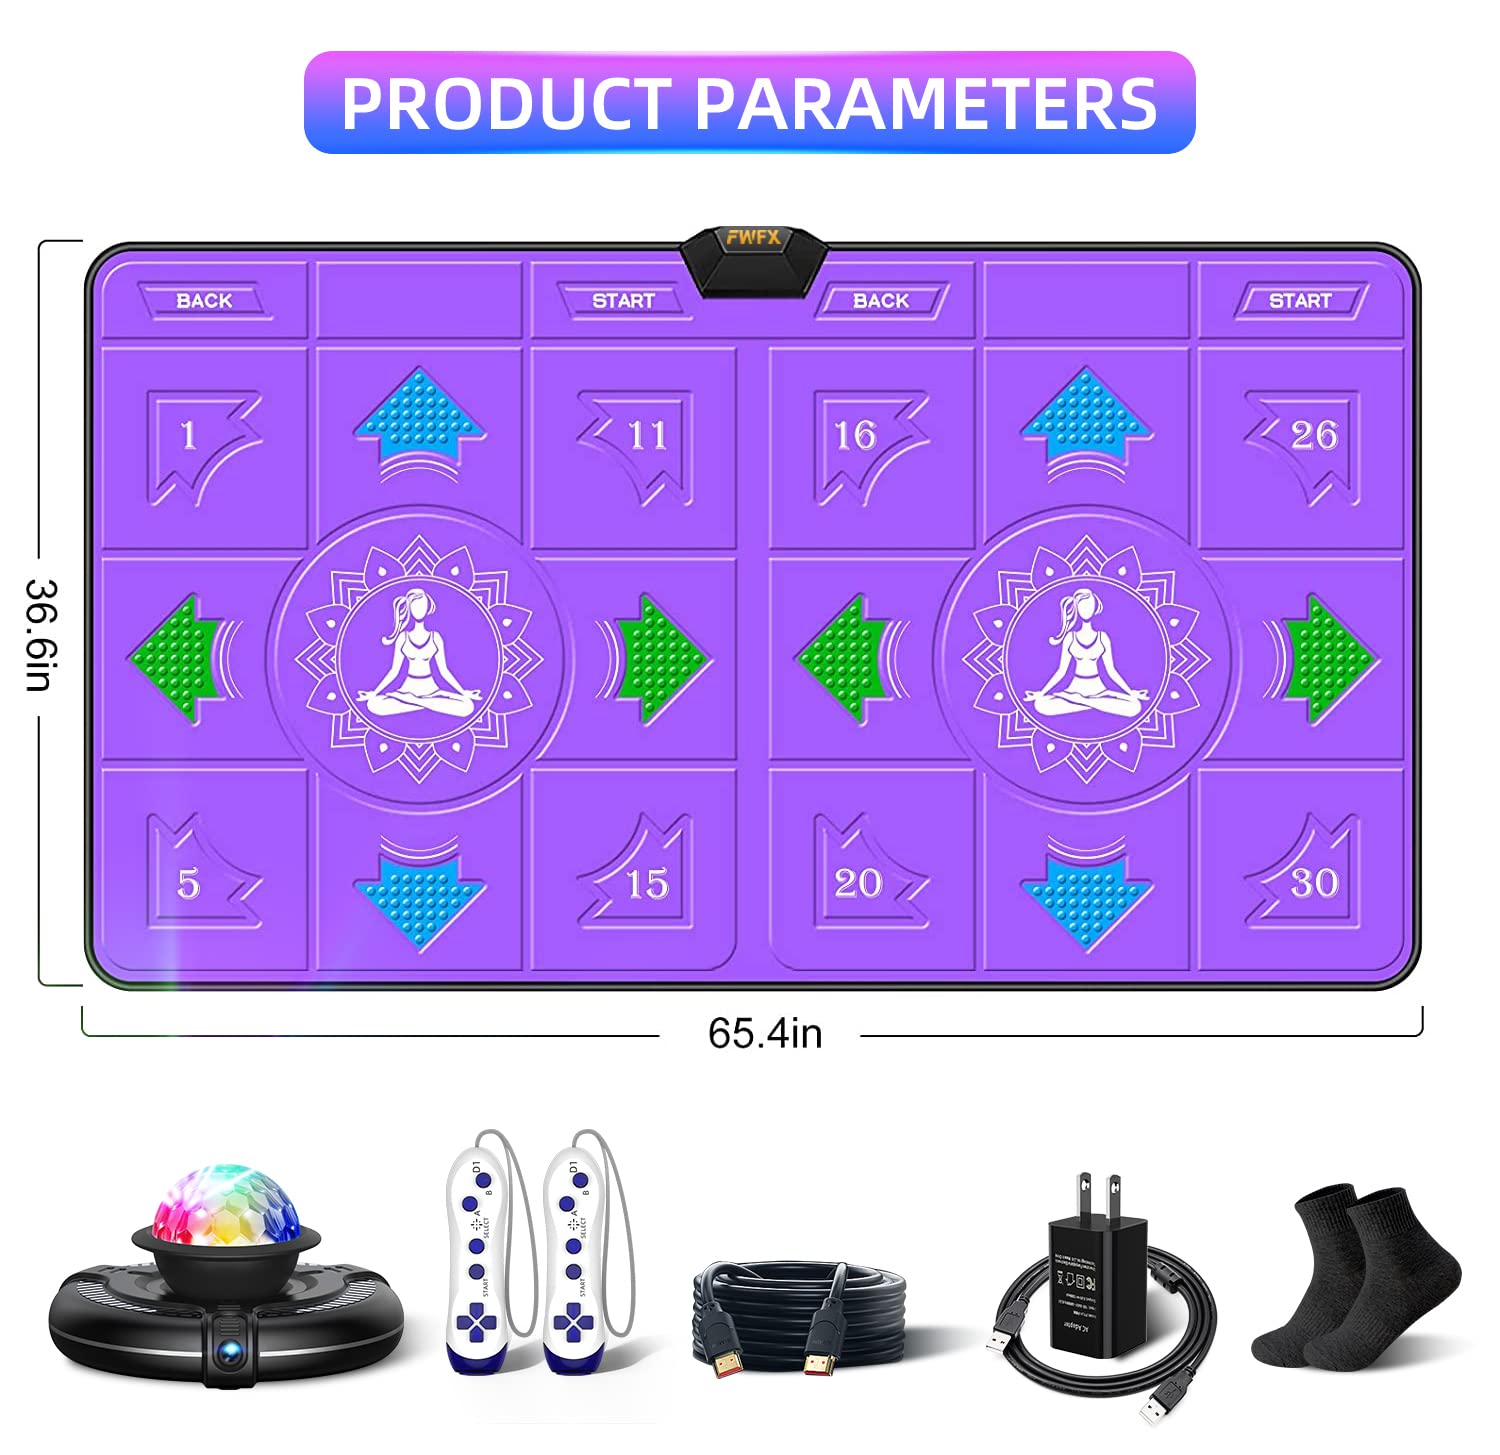 FWFX Electronic Dance Mats - Exercise Fitness Dance Pad Game for TV, Double Dancing Game for Kids and Adults, Wireless Musical Dancing Mat, Xmas Gifts for 6 7 8 9 10 11 12 Year Old Girls